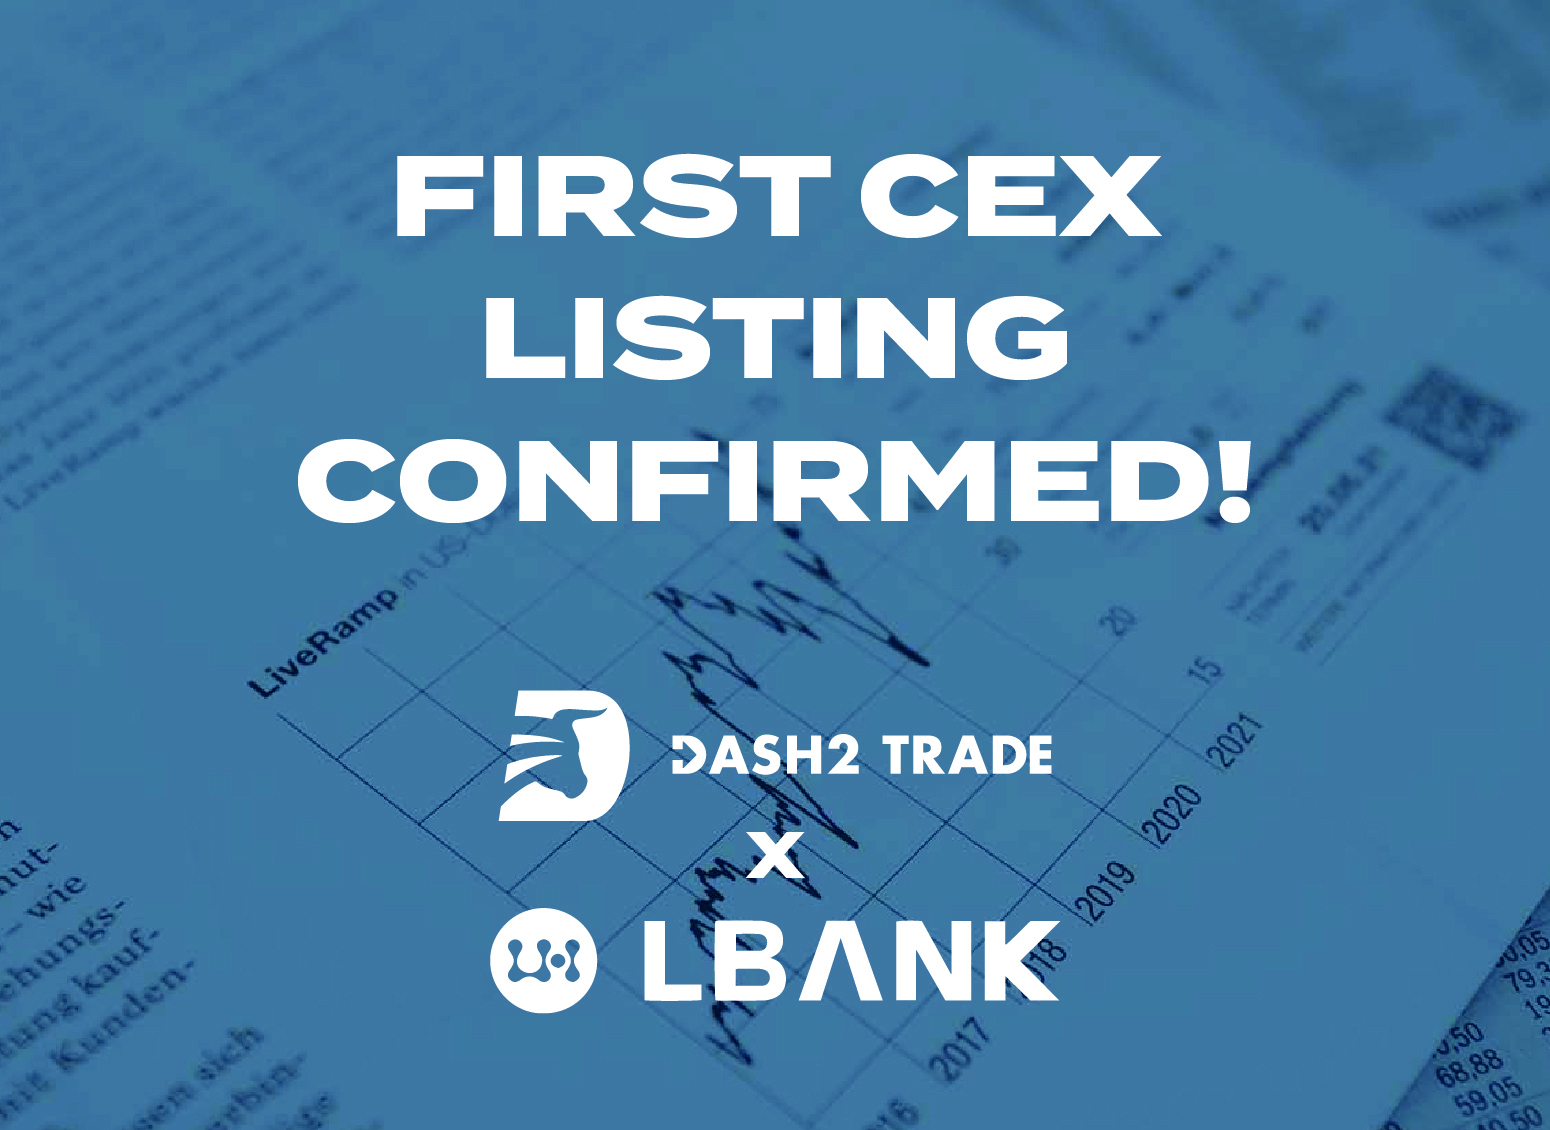 Dash 2 Trade Presale Just Confirmed Its First CEX Listing – $500,000 Raisedin 24 Hours Passing $4 Million So Far